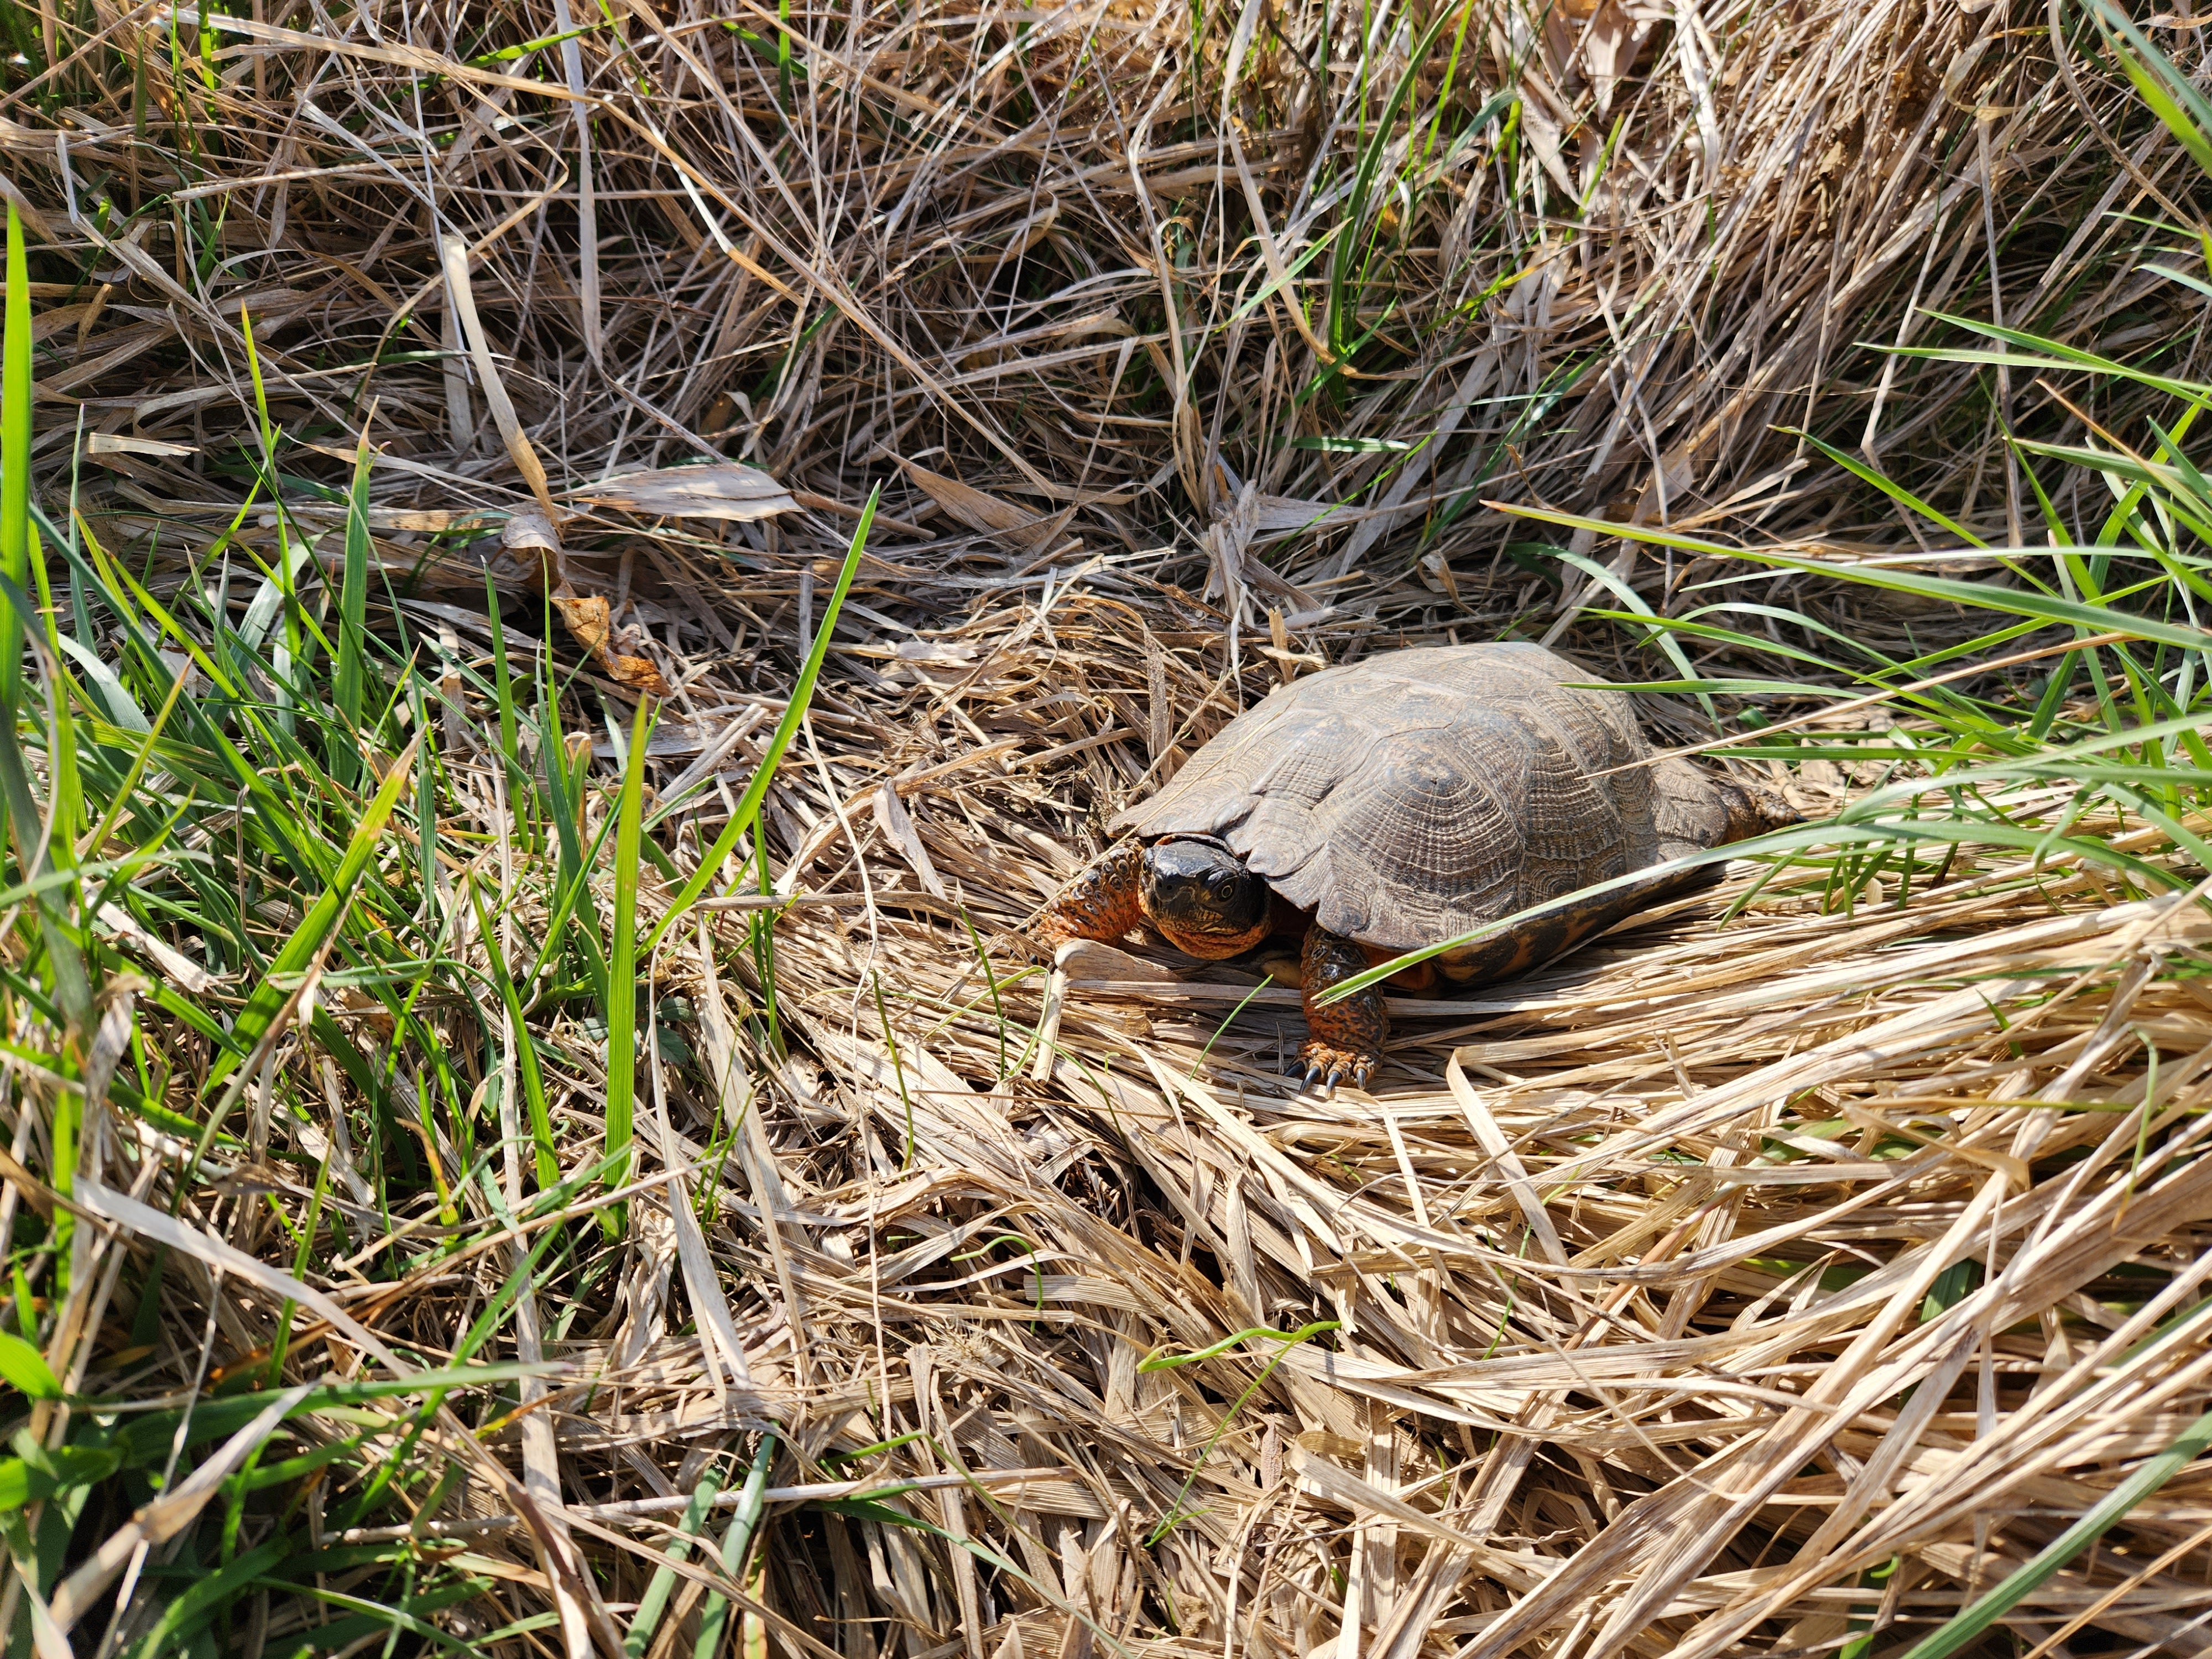 Photo of a wood turtle. A small brown turtle with bright orange front legs rests in the grass.